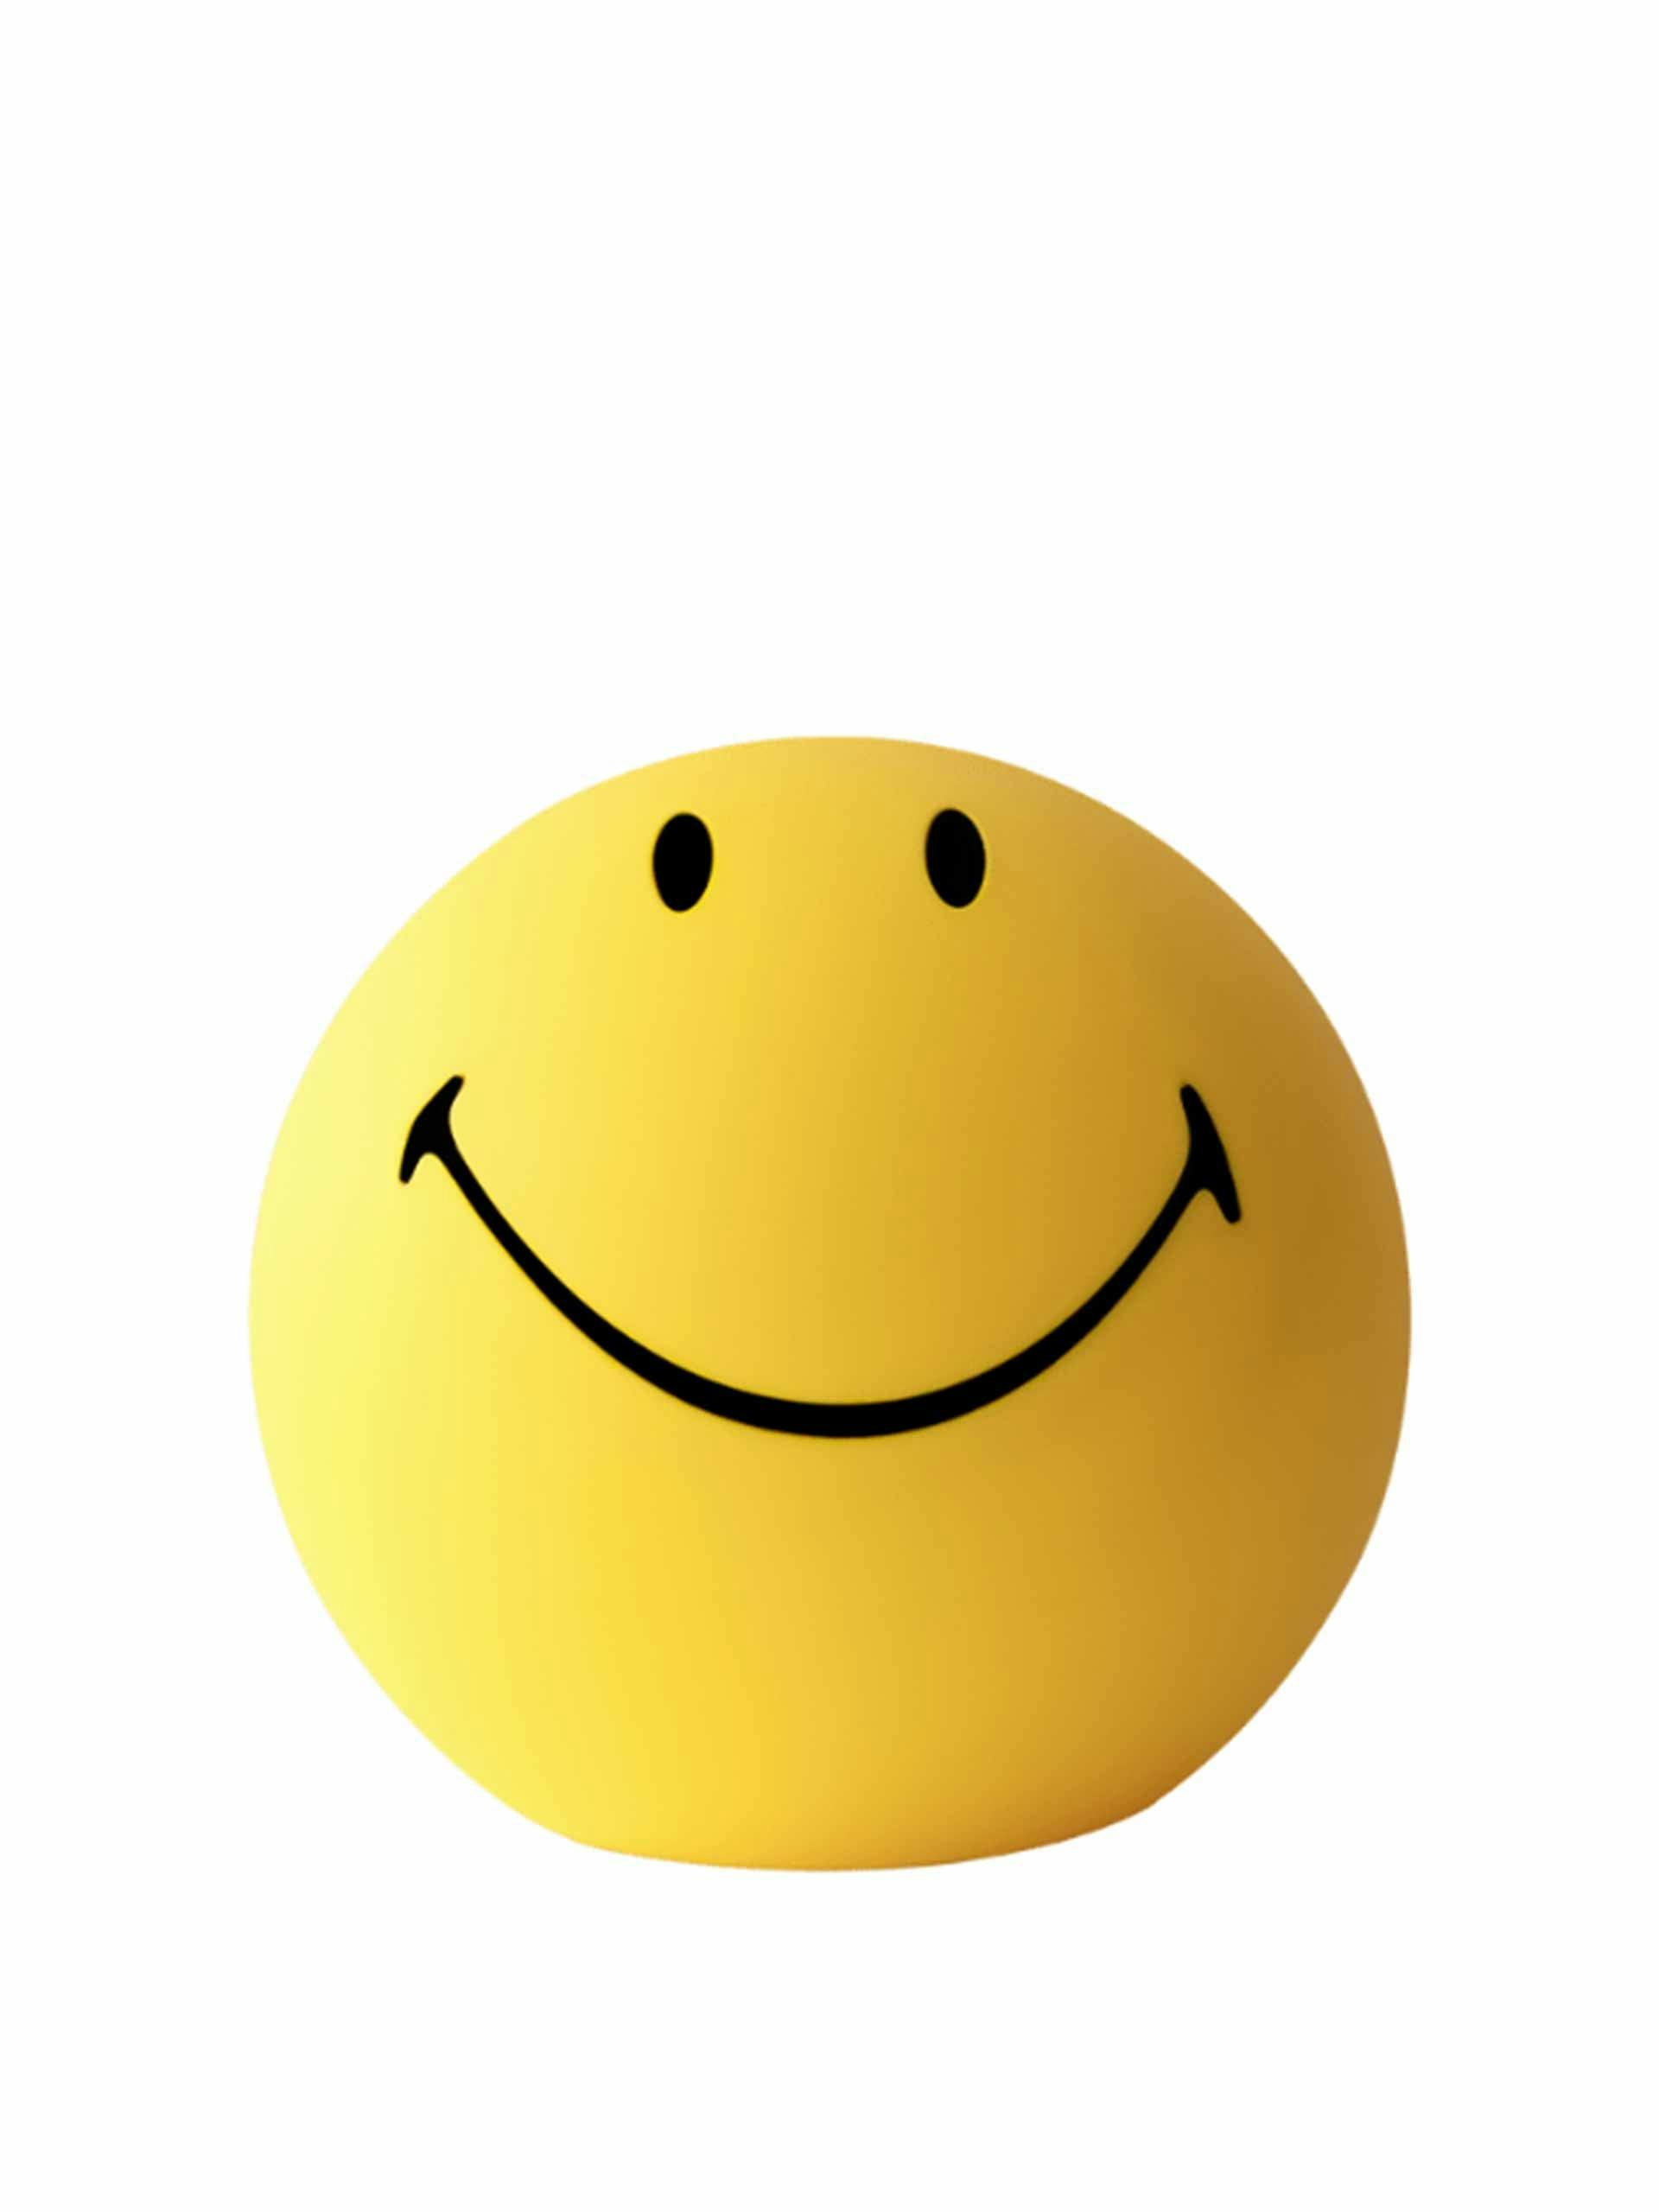 Smiley face lamp